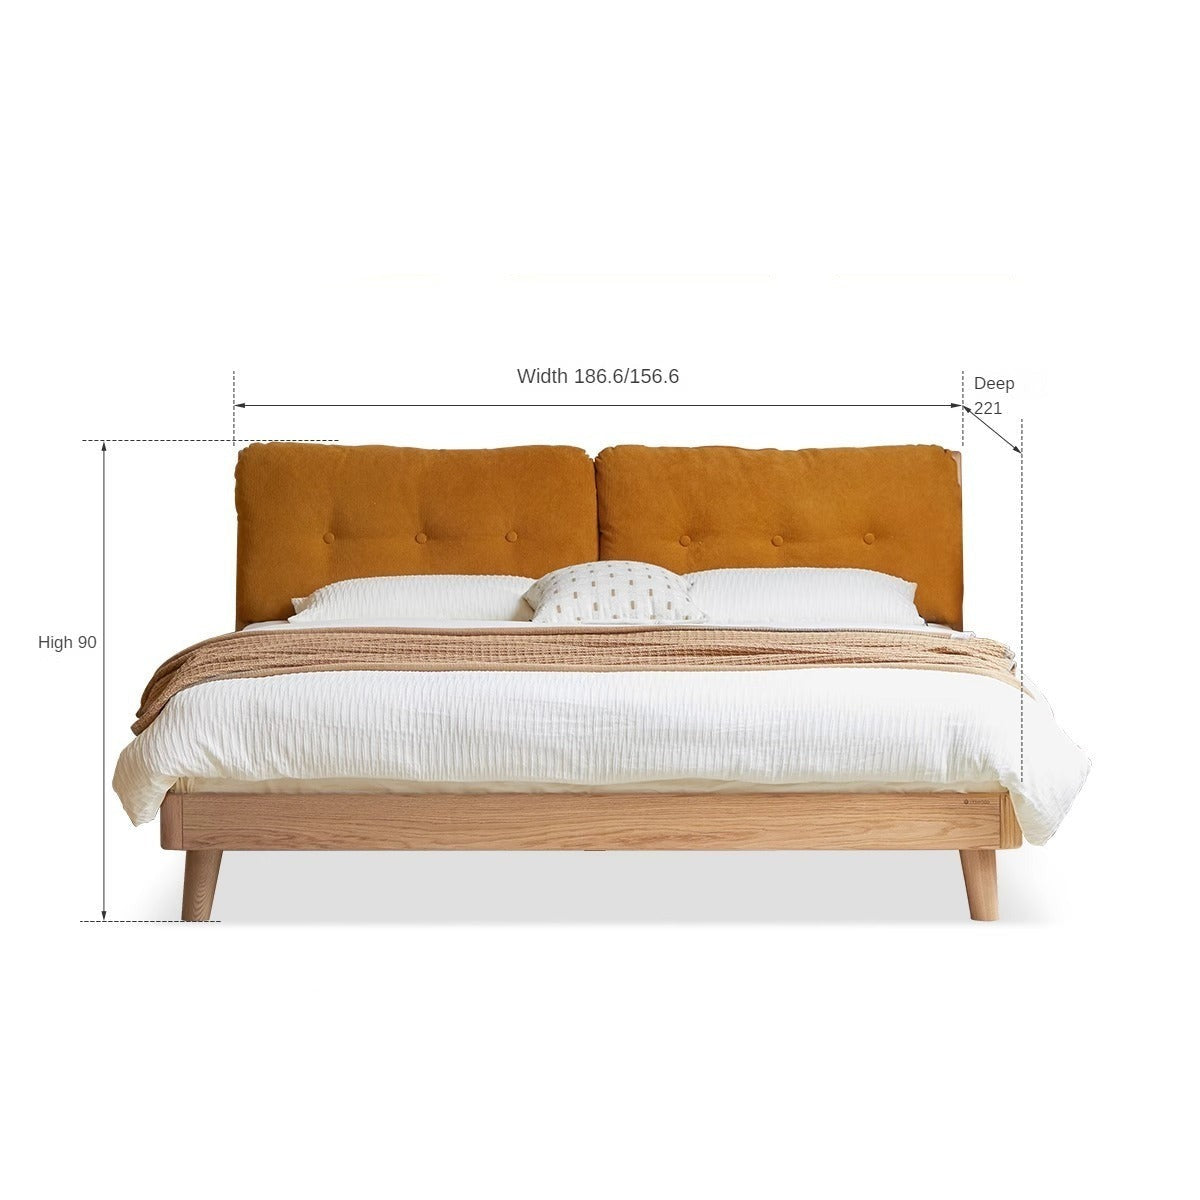 Cream style Soft bed Oak solid wood"_)